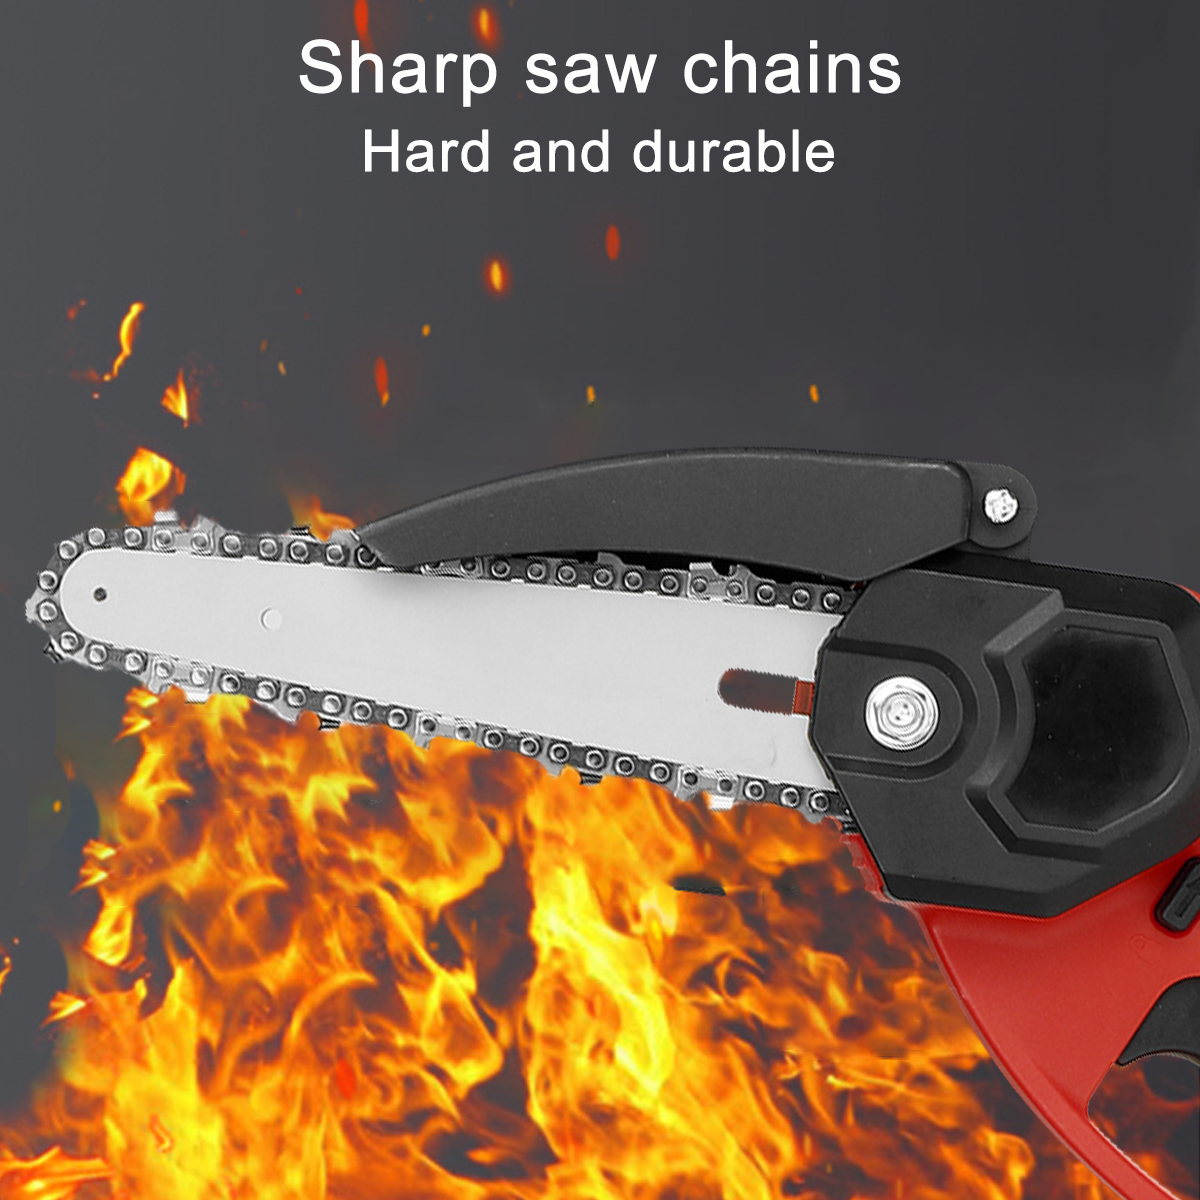 Handheld-Mini-Rechargable-Chainsaw-6-Electric-Chain-Saws-Stepless-Speed-Change-Wood-Work-Cutter-W-Ba-1837413-5